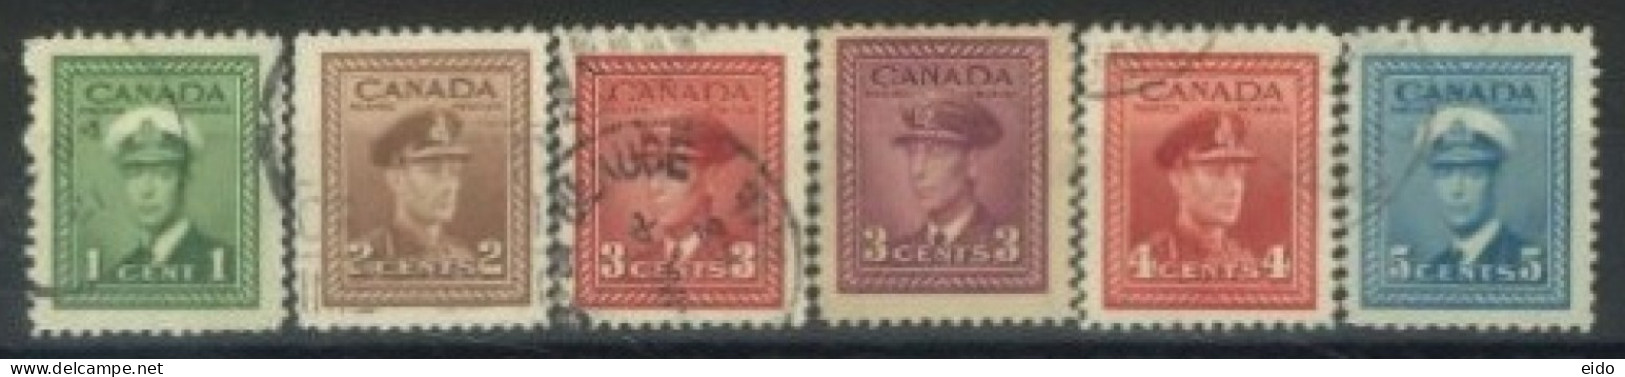 CANADA - 1942, KING GEORGE VI IN NAVAL UNIFORM STAMPS SET OF 6, USED. - Usati